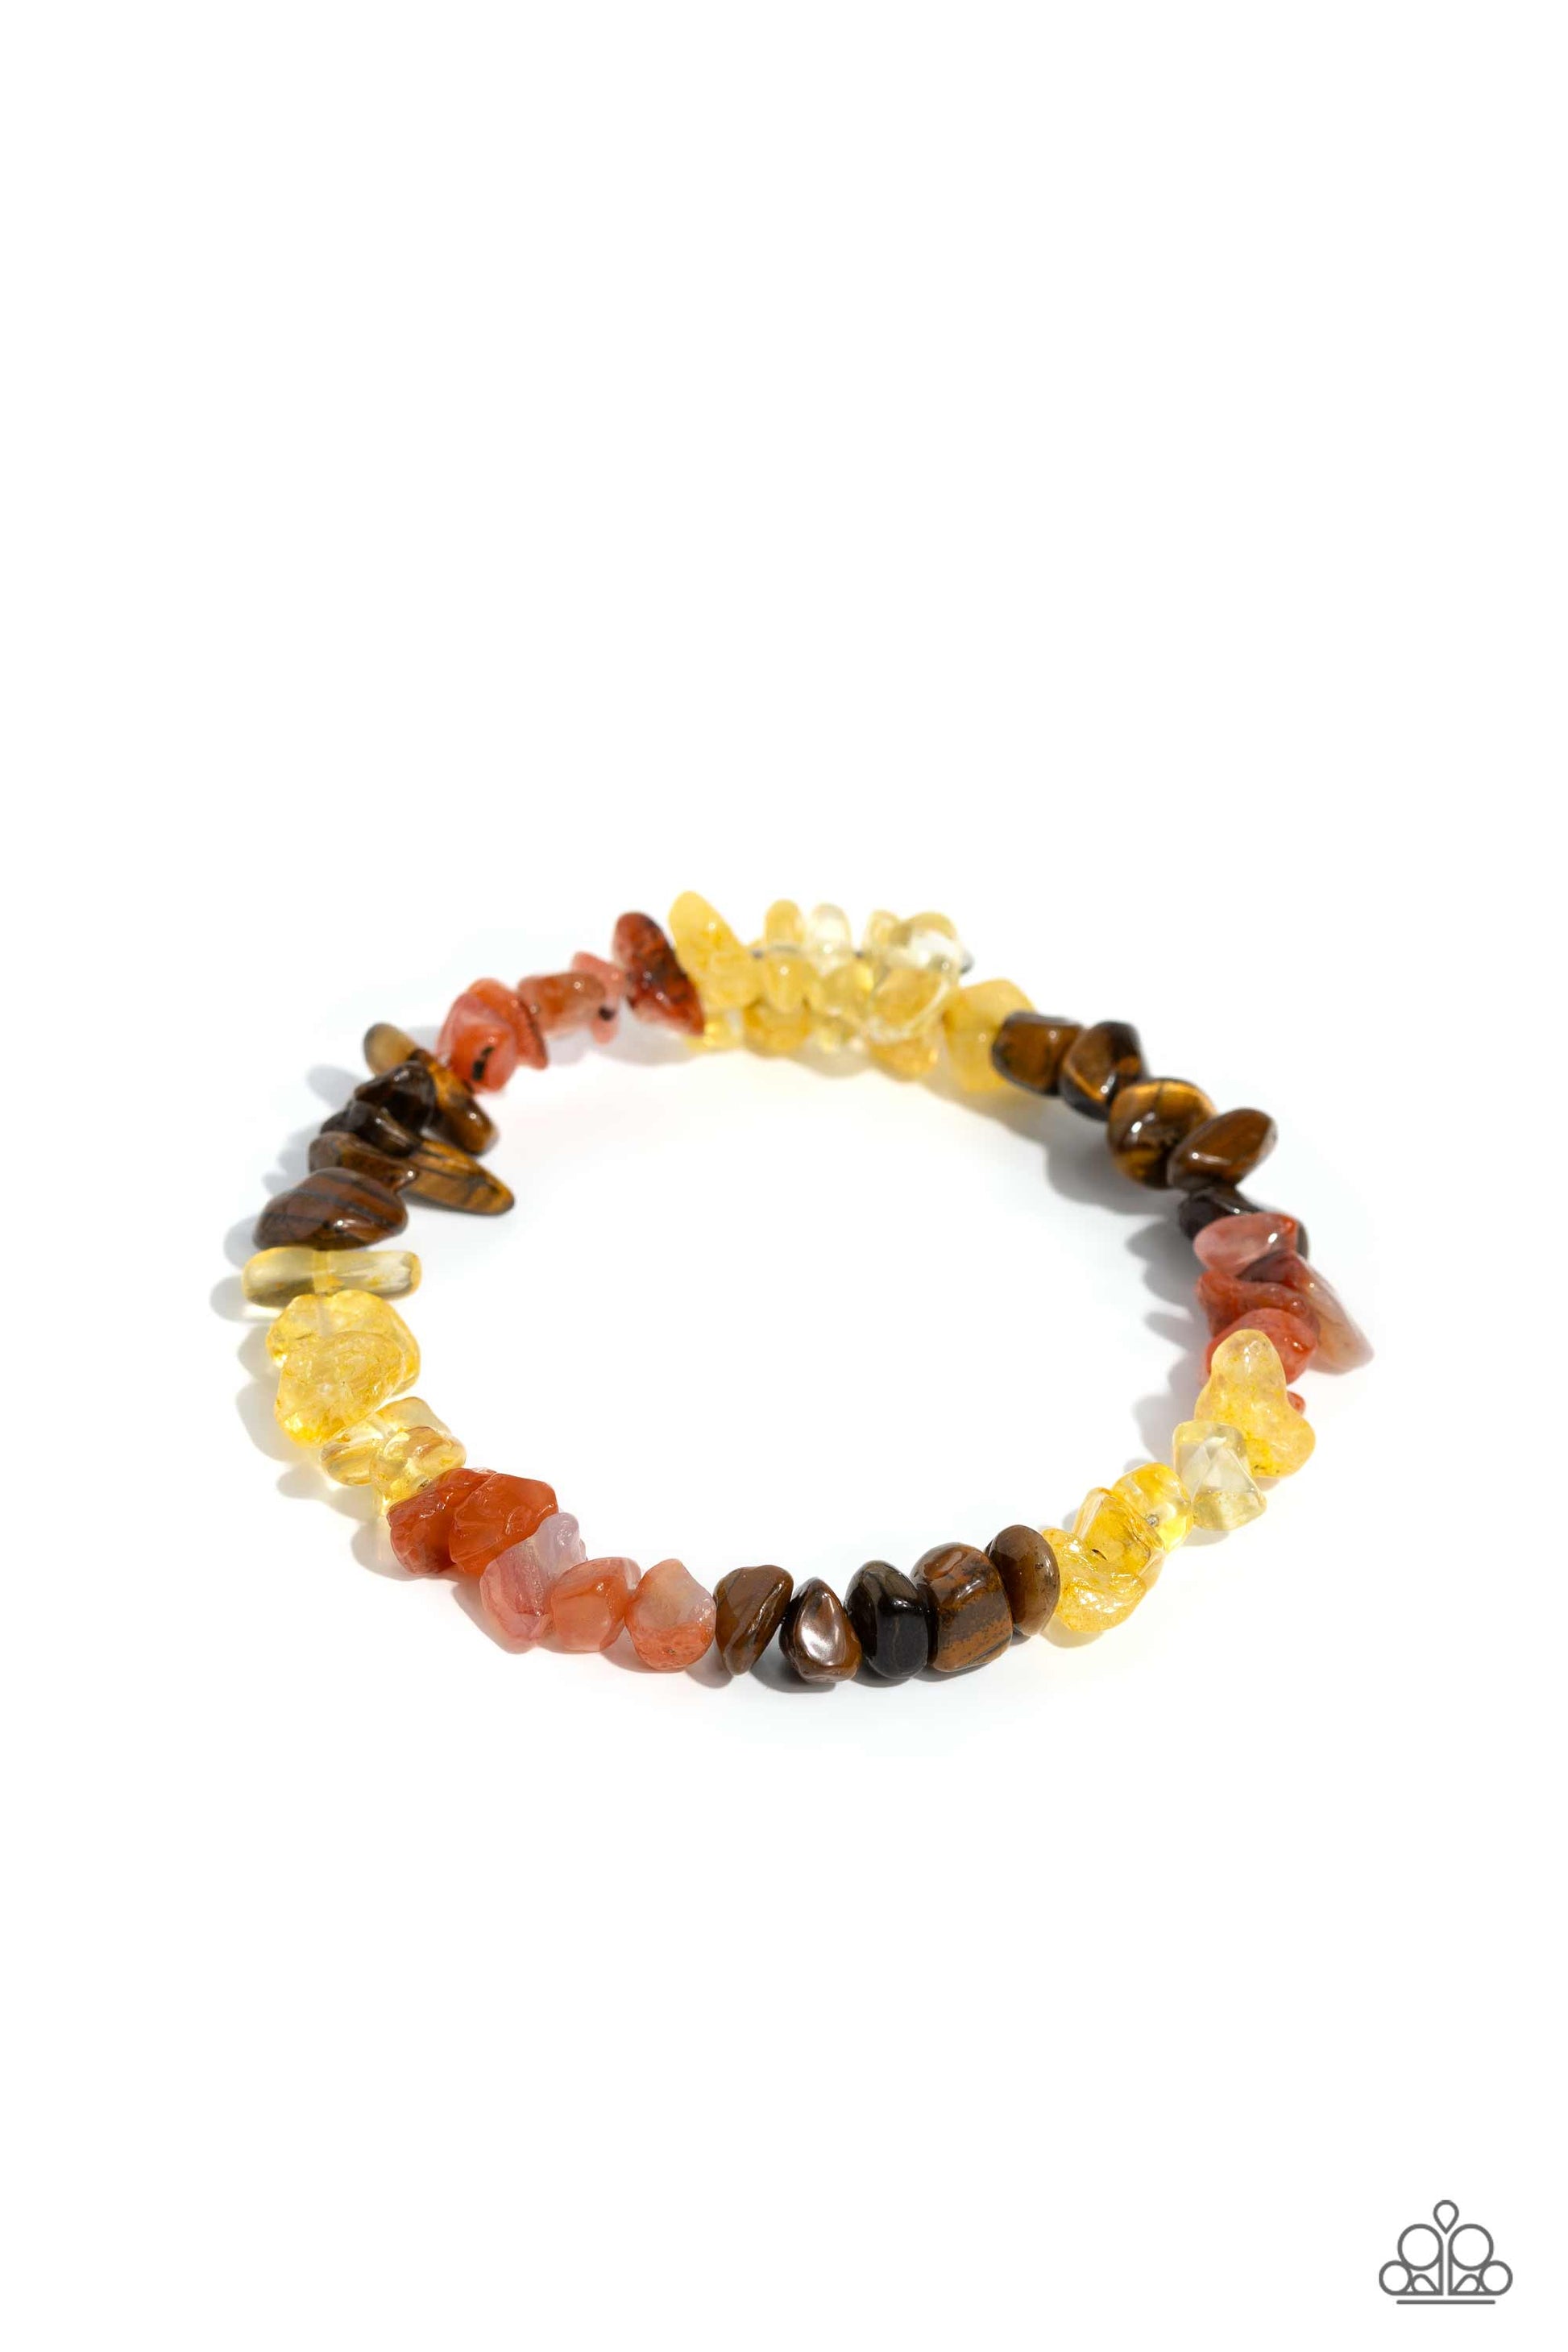 Threaded along a wire that coils around the wrist, a chiseled collection of tiger's eye, orange, and yellow stones creates a naturally colorful infinity wrap style bracelet for a groundbreaking statement. As the stone elements in this piece are natural, some color variation is normal.  Sold as one individual bracelet